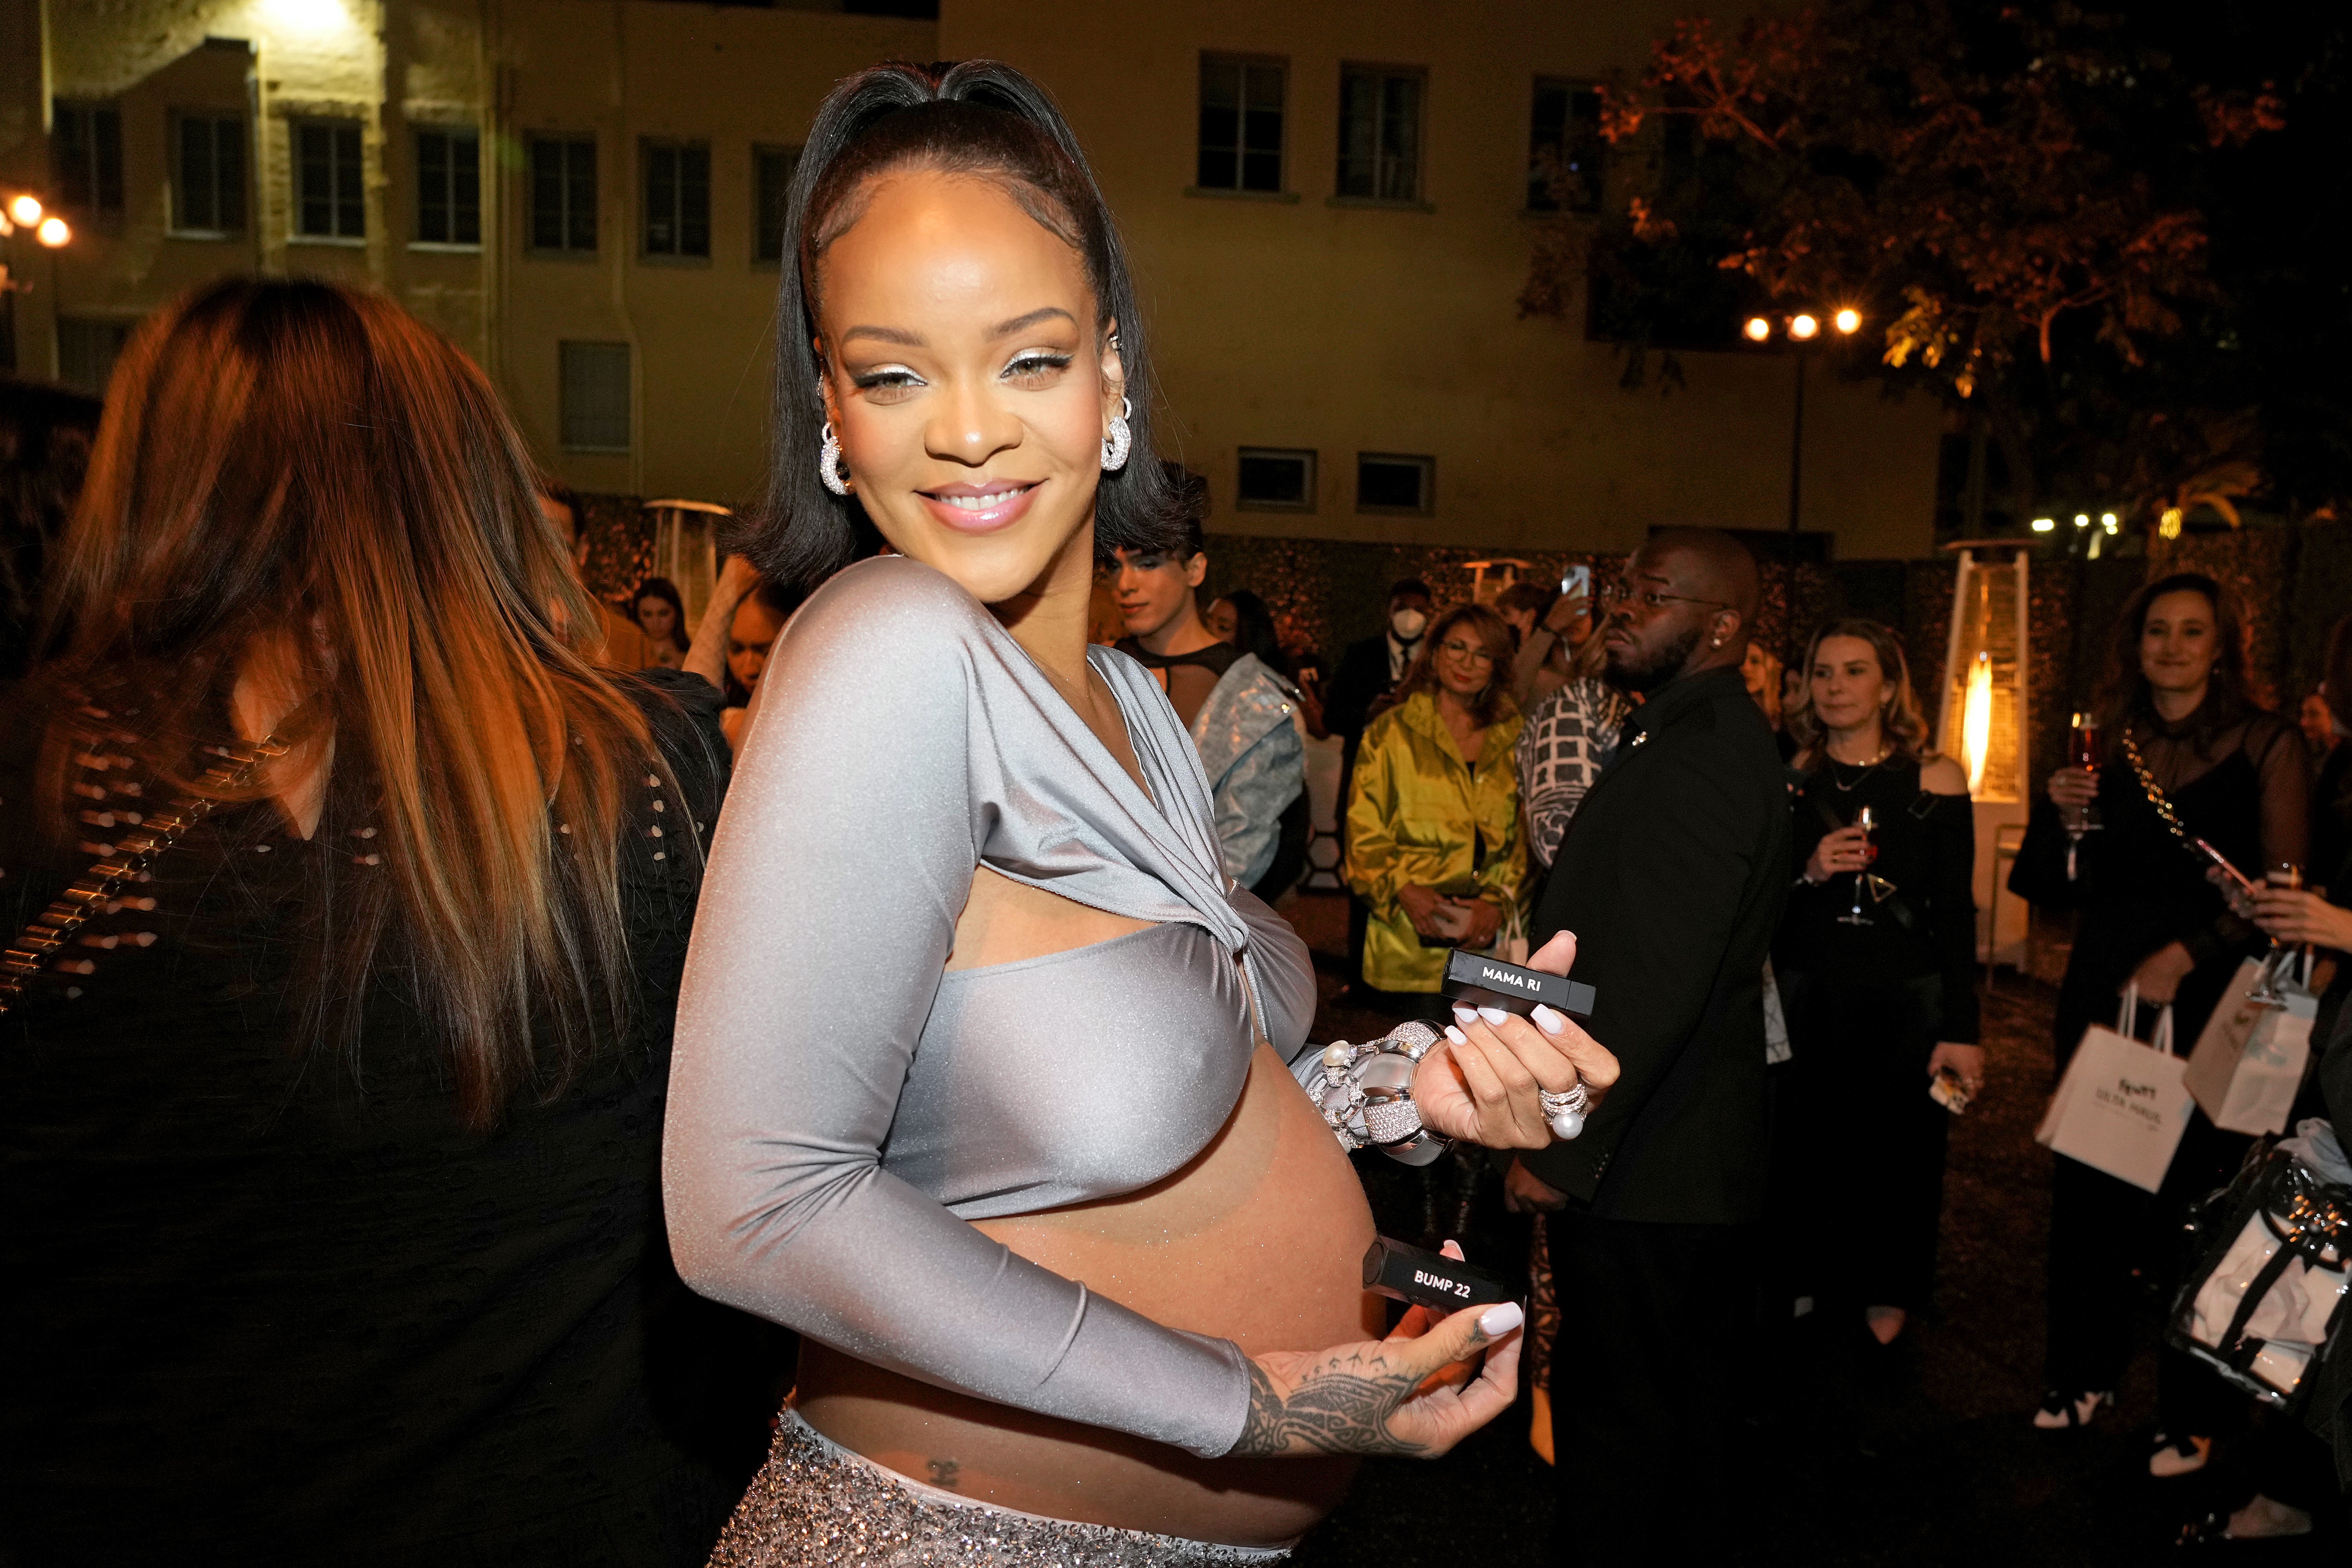 LOS ANGELES, CALIFORNIA - MARCH 12: Rihanna poses with engraved Fenty Beauty ICON Lipsticks as she celebrates the launch of Fenty Beauty at ULTA Beauty on March 12, 2022 in Los Angeles, California. (Photo by Kevin Mazur/Getty Images for Fenty Beauty by Ri (Foto: Getty Images for Fenty Beauty by)